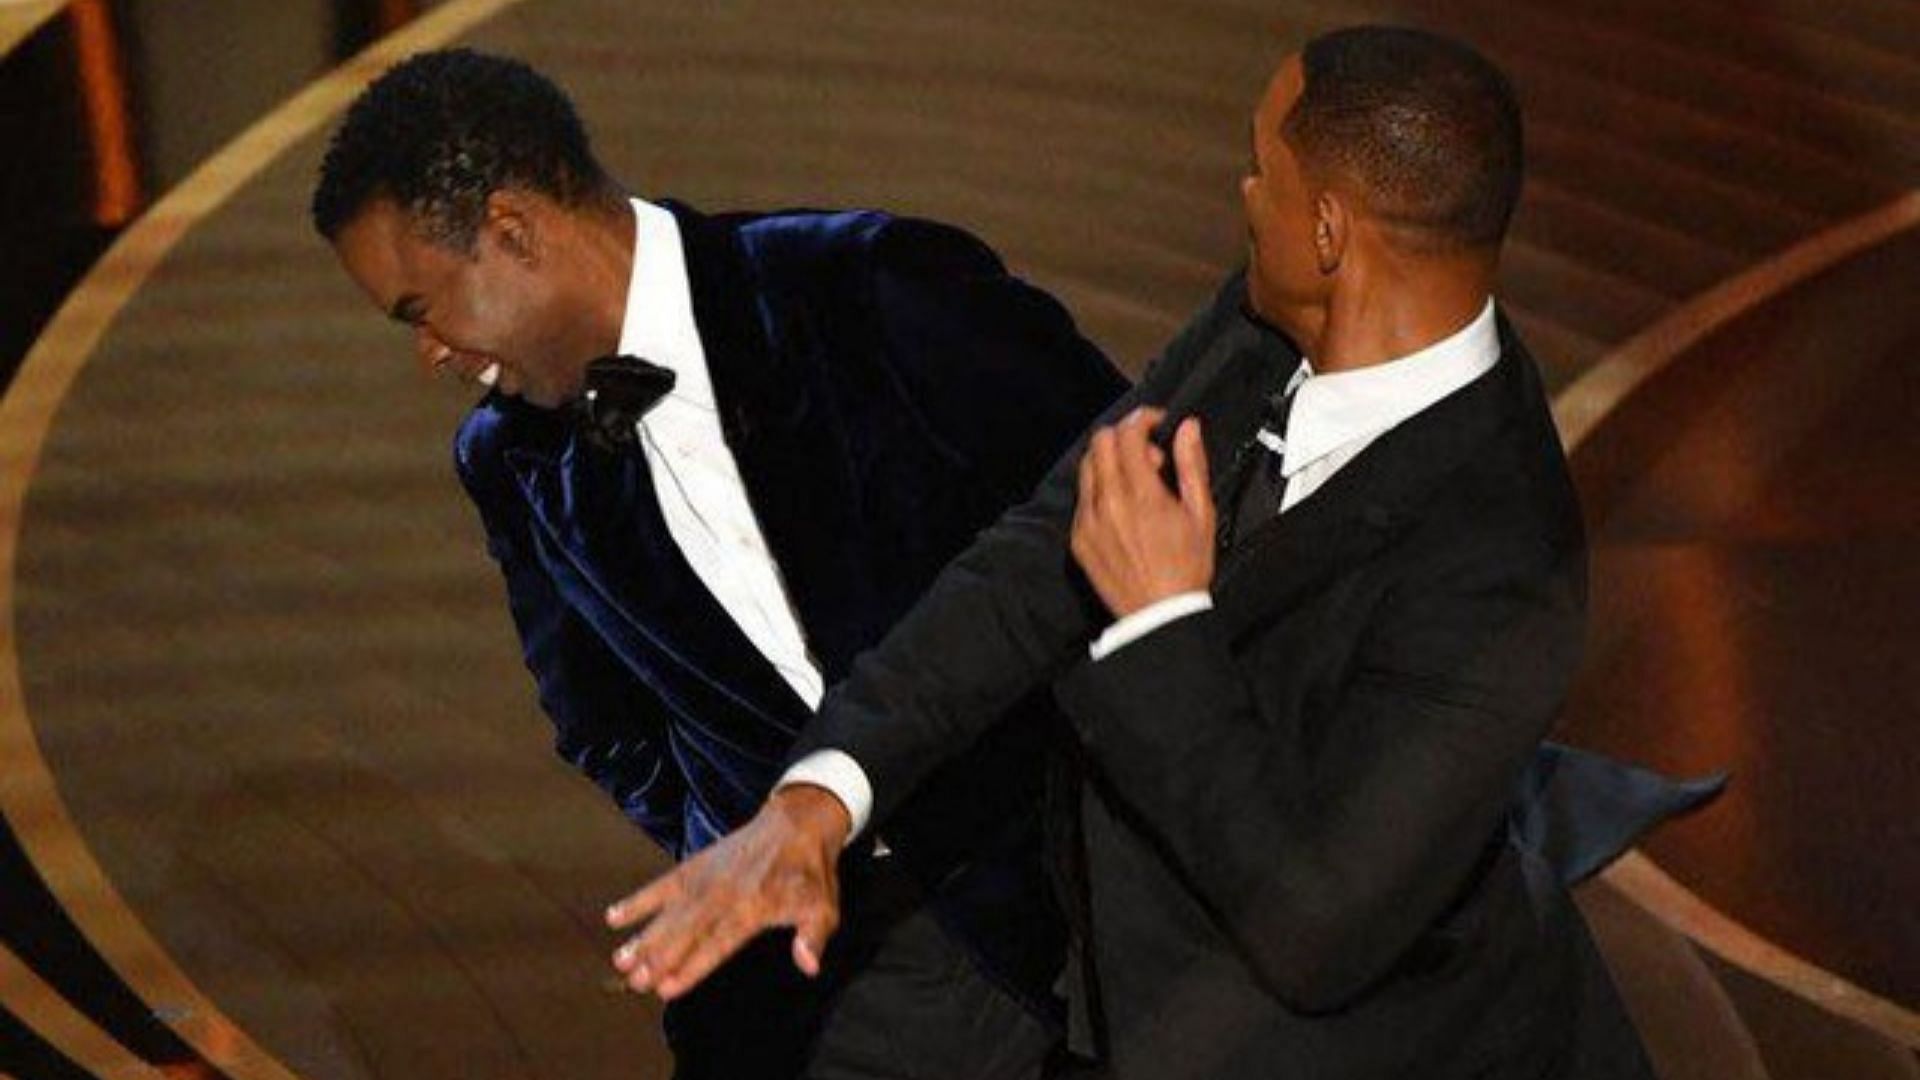 A still from Oscars 2022, where Will Smith slapped Chris Rock onstage (Image Via tonyperaltanoticias @Instagram)